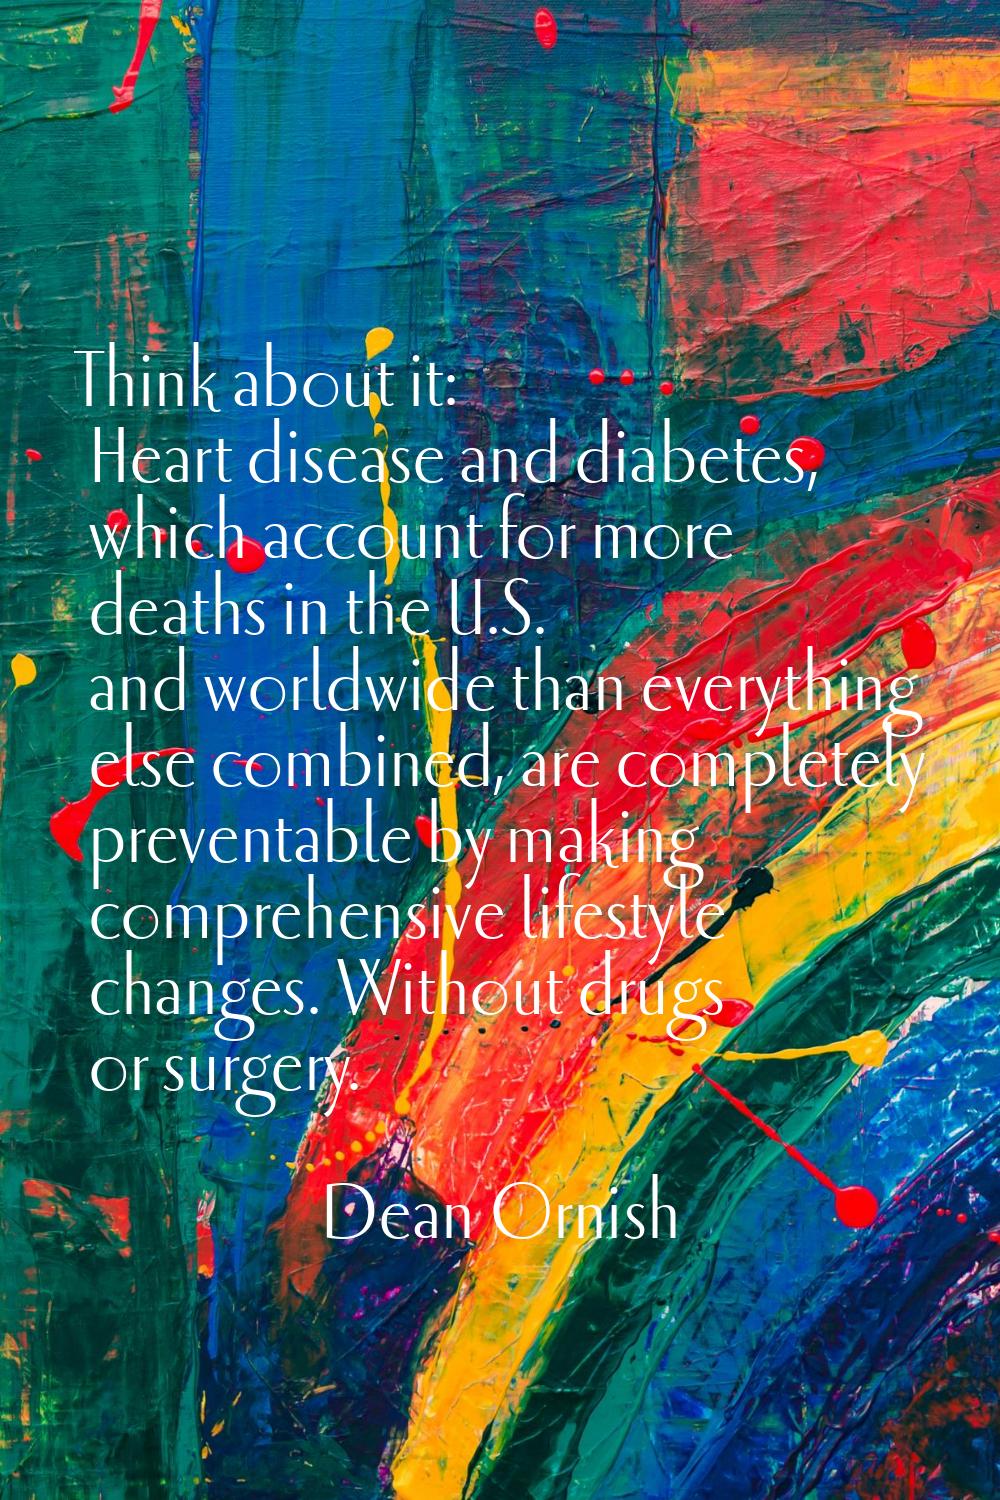 Think about it: Heart disease and diabetes, which account for more deaths in the U.S. and worldwide